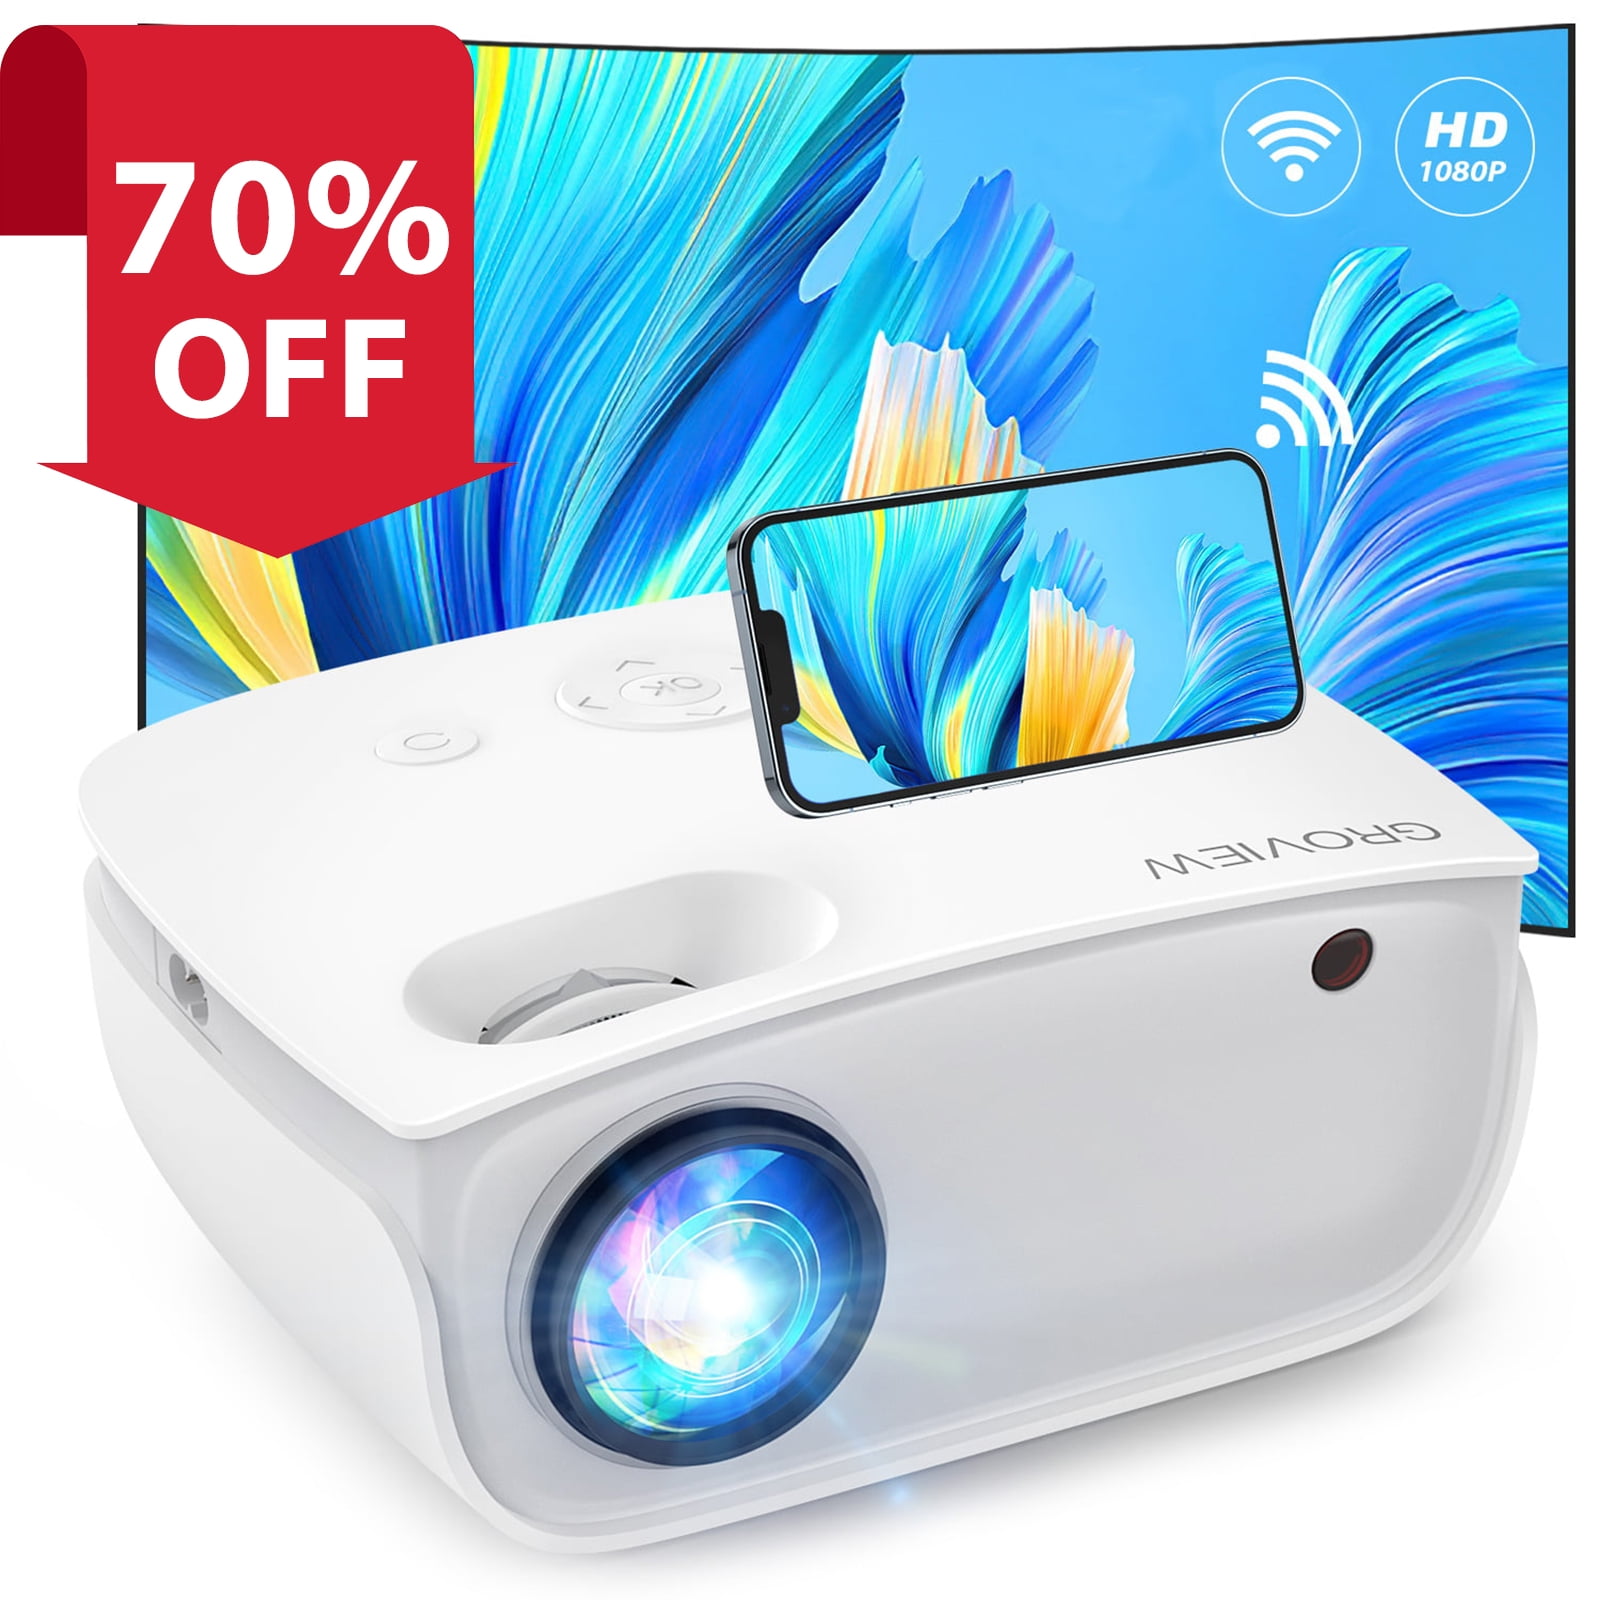 GROVIEW Mini WiFi Projector, 7500 Lumen Portable Movie Projector with 100" Projector  Screen, 1080P  240" Display Supported, Home Theater Projector Compatible  with TV Stick, Android, iPhone